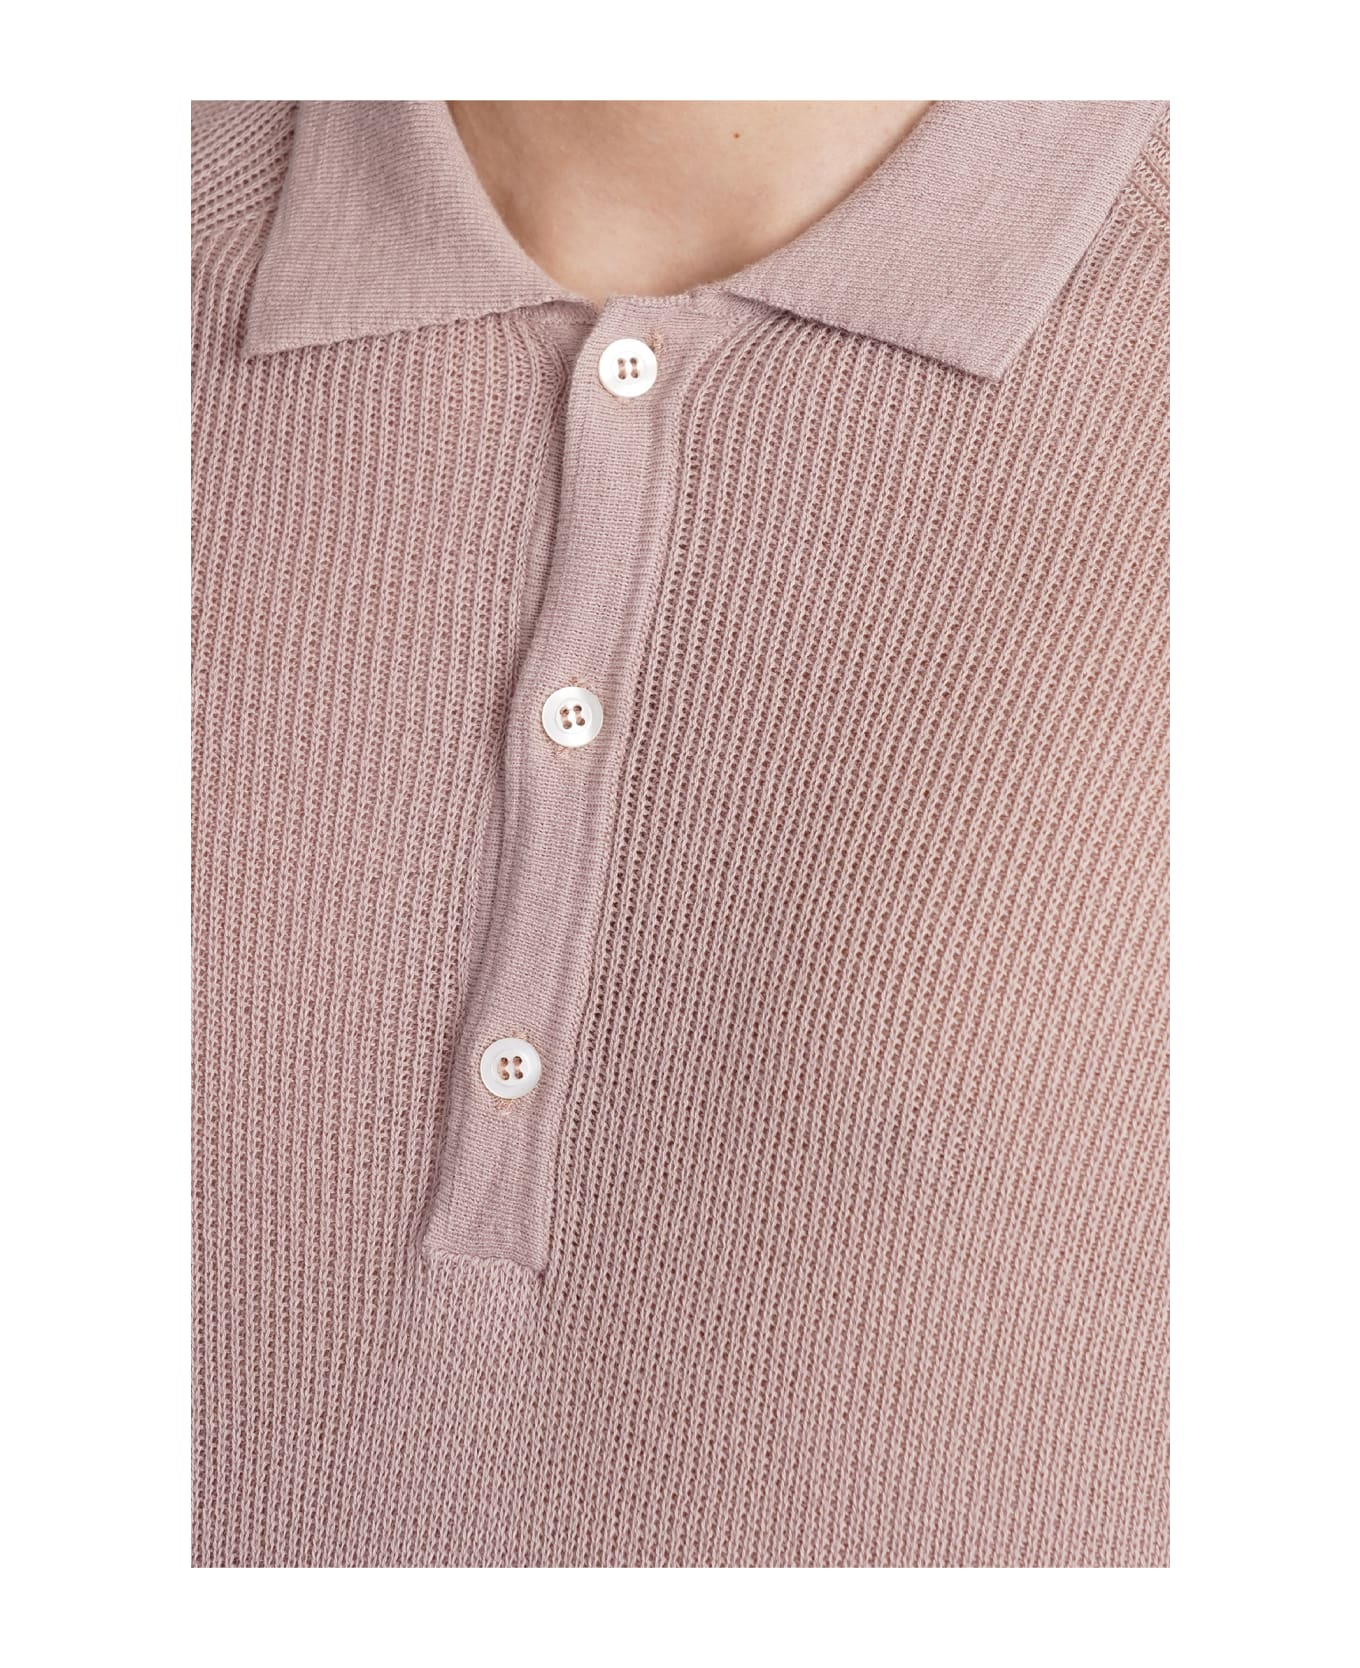 Laneus Polo In Rose-pink Cotton - Rosa ポロシャツ